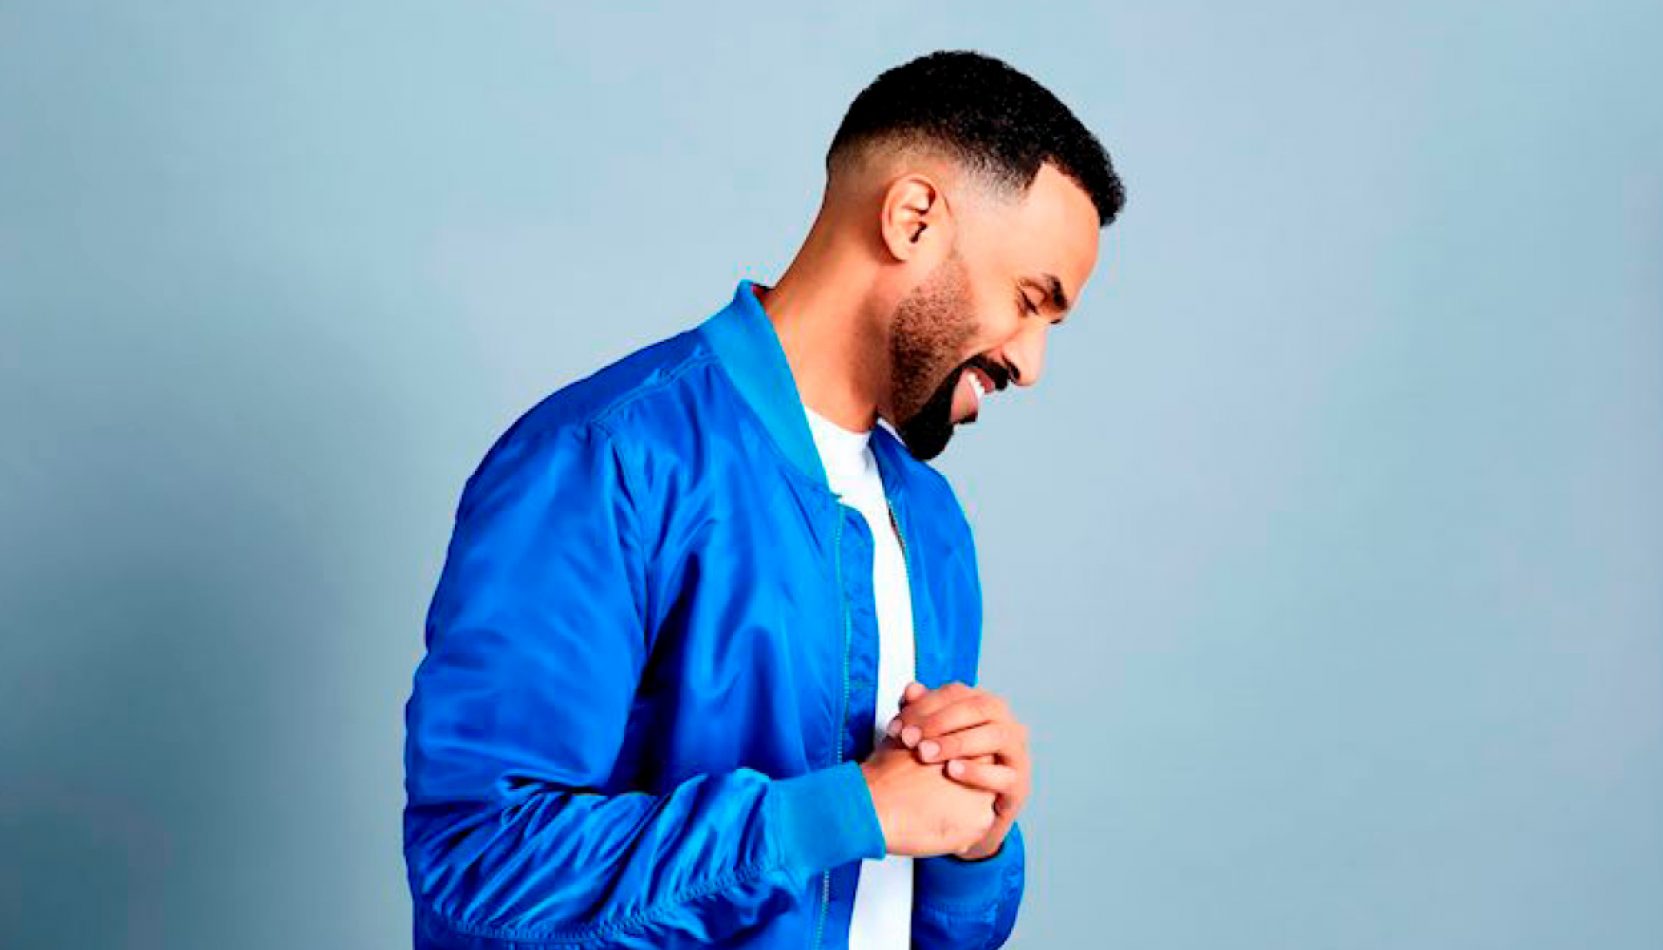 craig david, whats on this summer, jockey club live, live music, racing, entertainment, guide to whats on, guide to whats on this summer, guide to surrey, live music, things to do, events in surrey, nights out in surrey